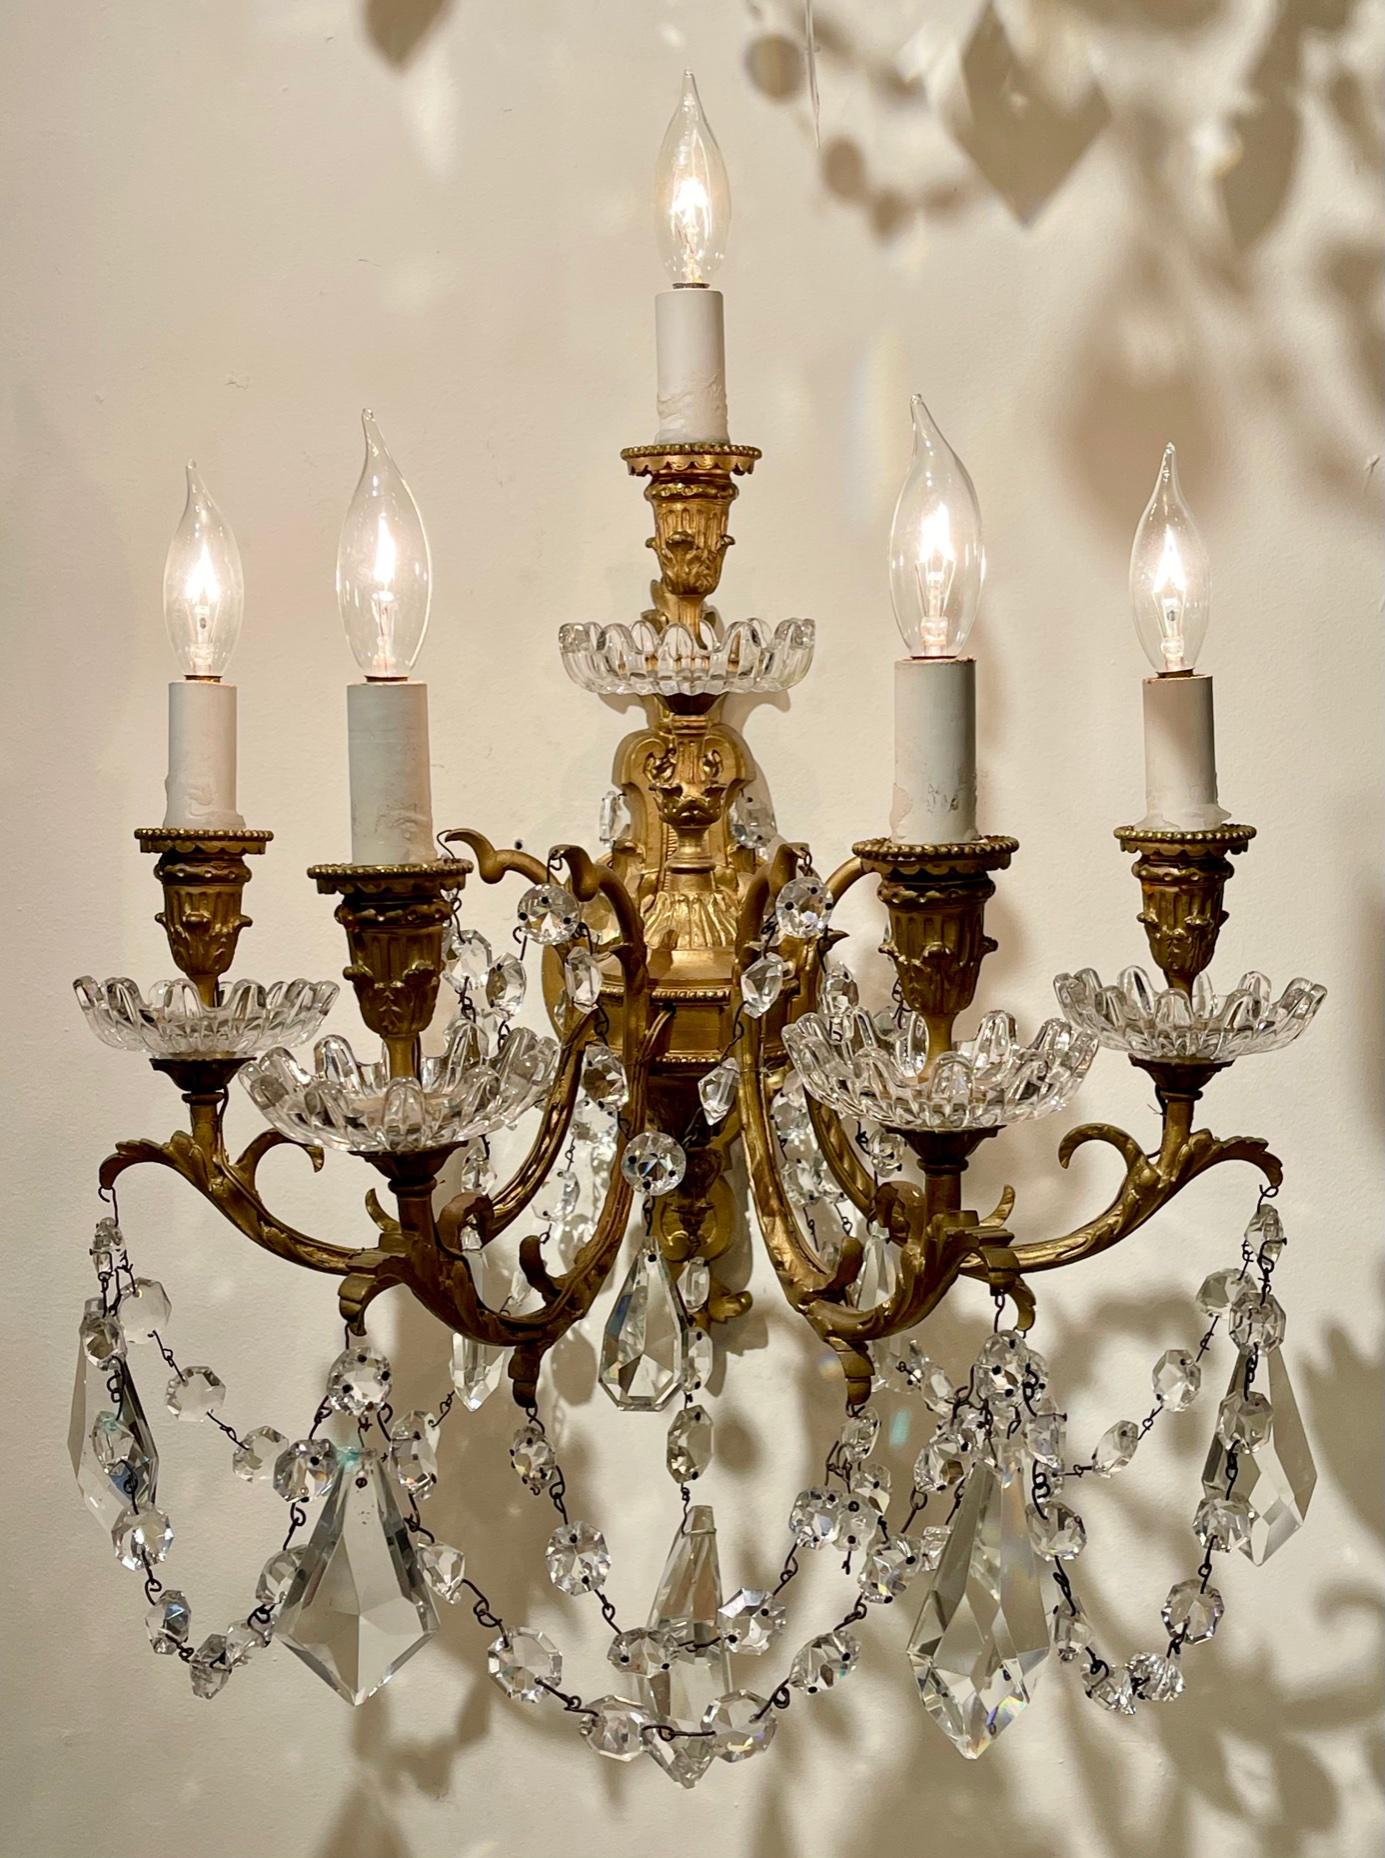 Exceptional pair of 19th century Baccarat crystal sconces with 4 lights. Beautiful draping crystals along with a gorgeous decorative gilt bronze base. Very fine quality!